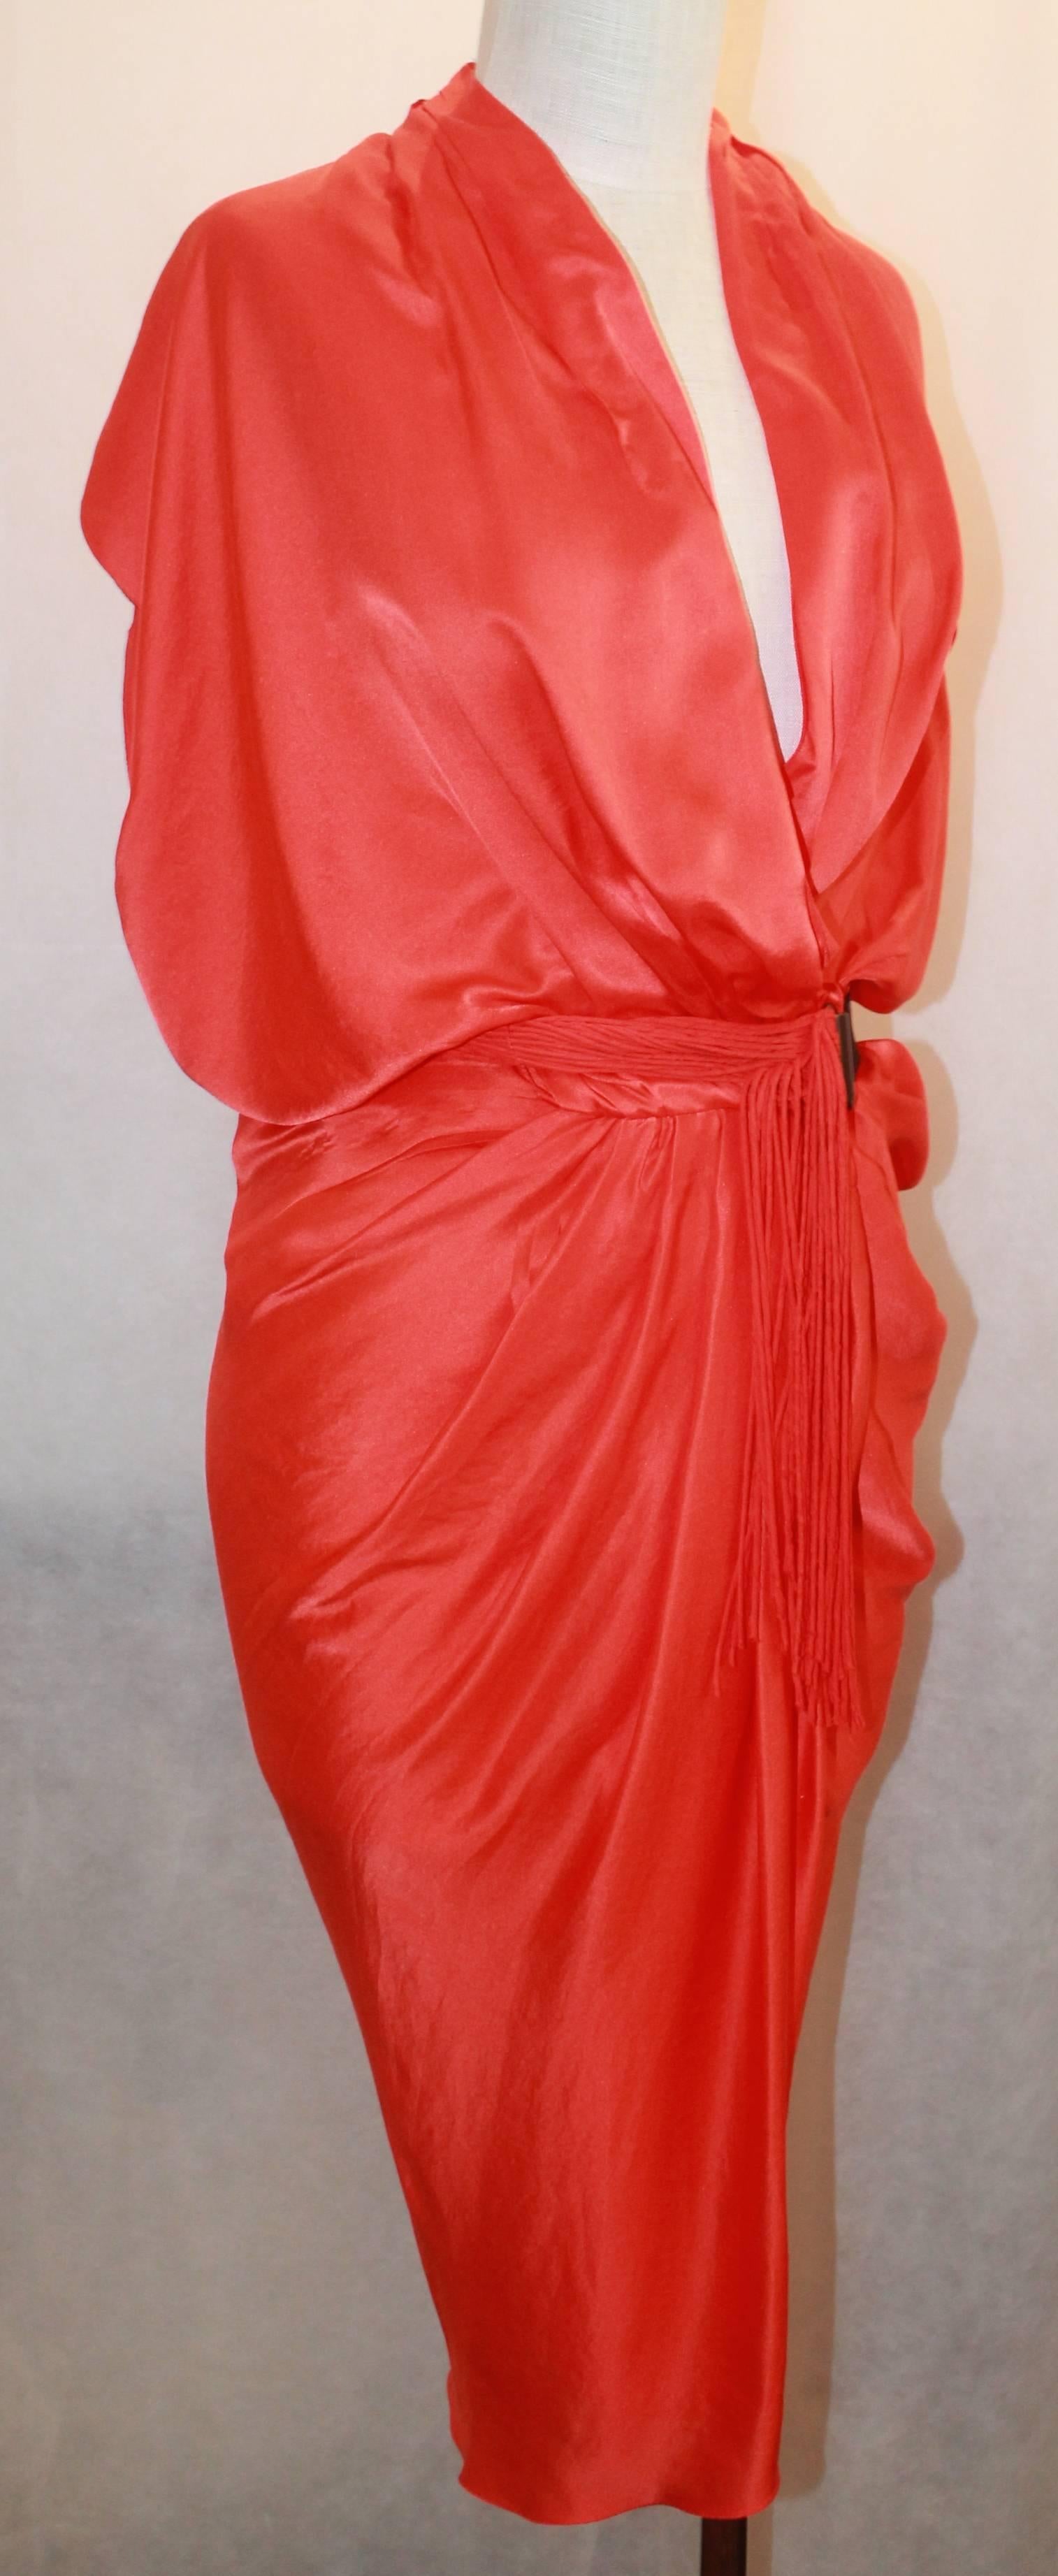 Lanvin Burnt Orange Ruched Silk Dress with Belt - 38. This dress is in excellent condition and has a plunging neckline in the front. The belt has a casual, tropical feel and has tassels hanging with an elastic back. 

Measurements:
Bust-